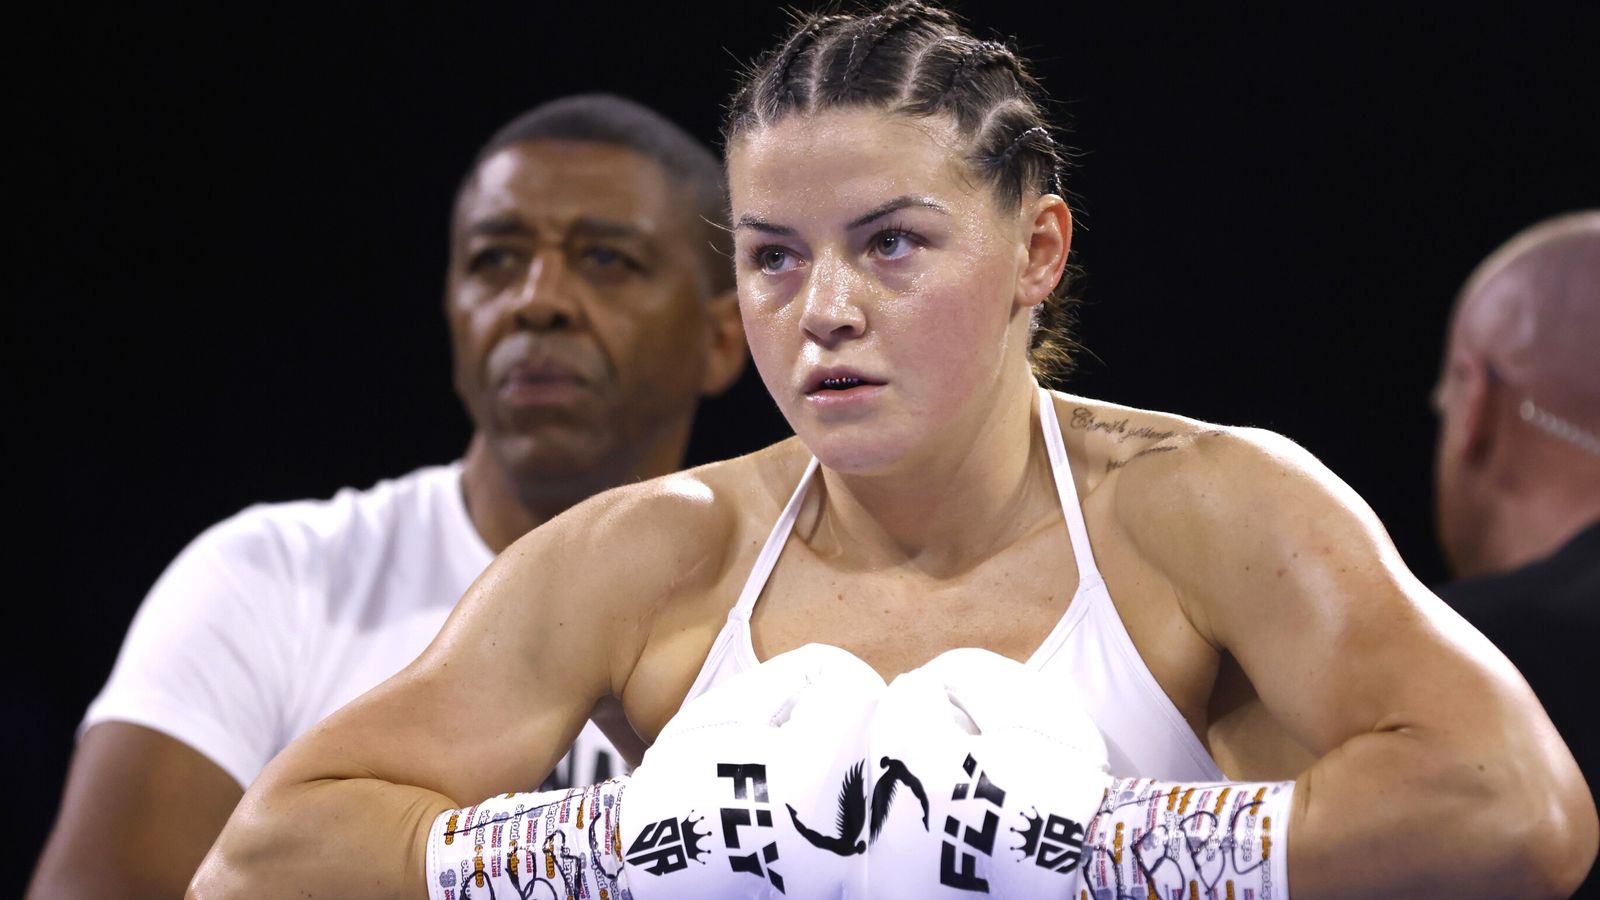 Sandy Ryan held to a split decision draw with Jessica McCaskill in undisputed welterweight world title fight in Orlando